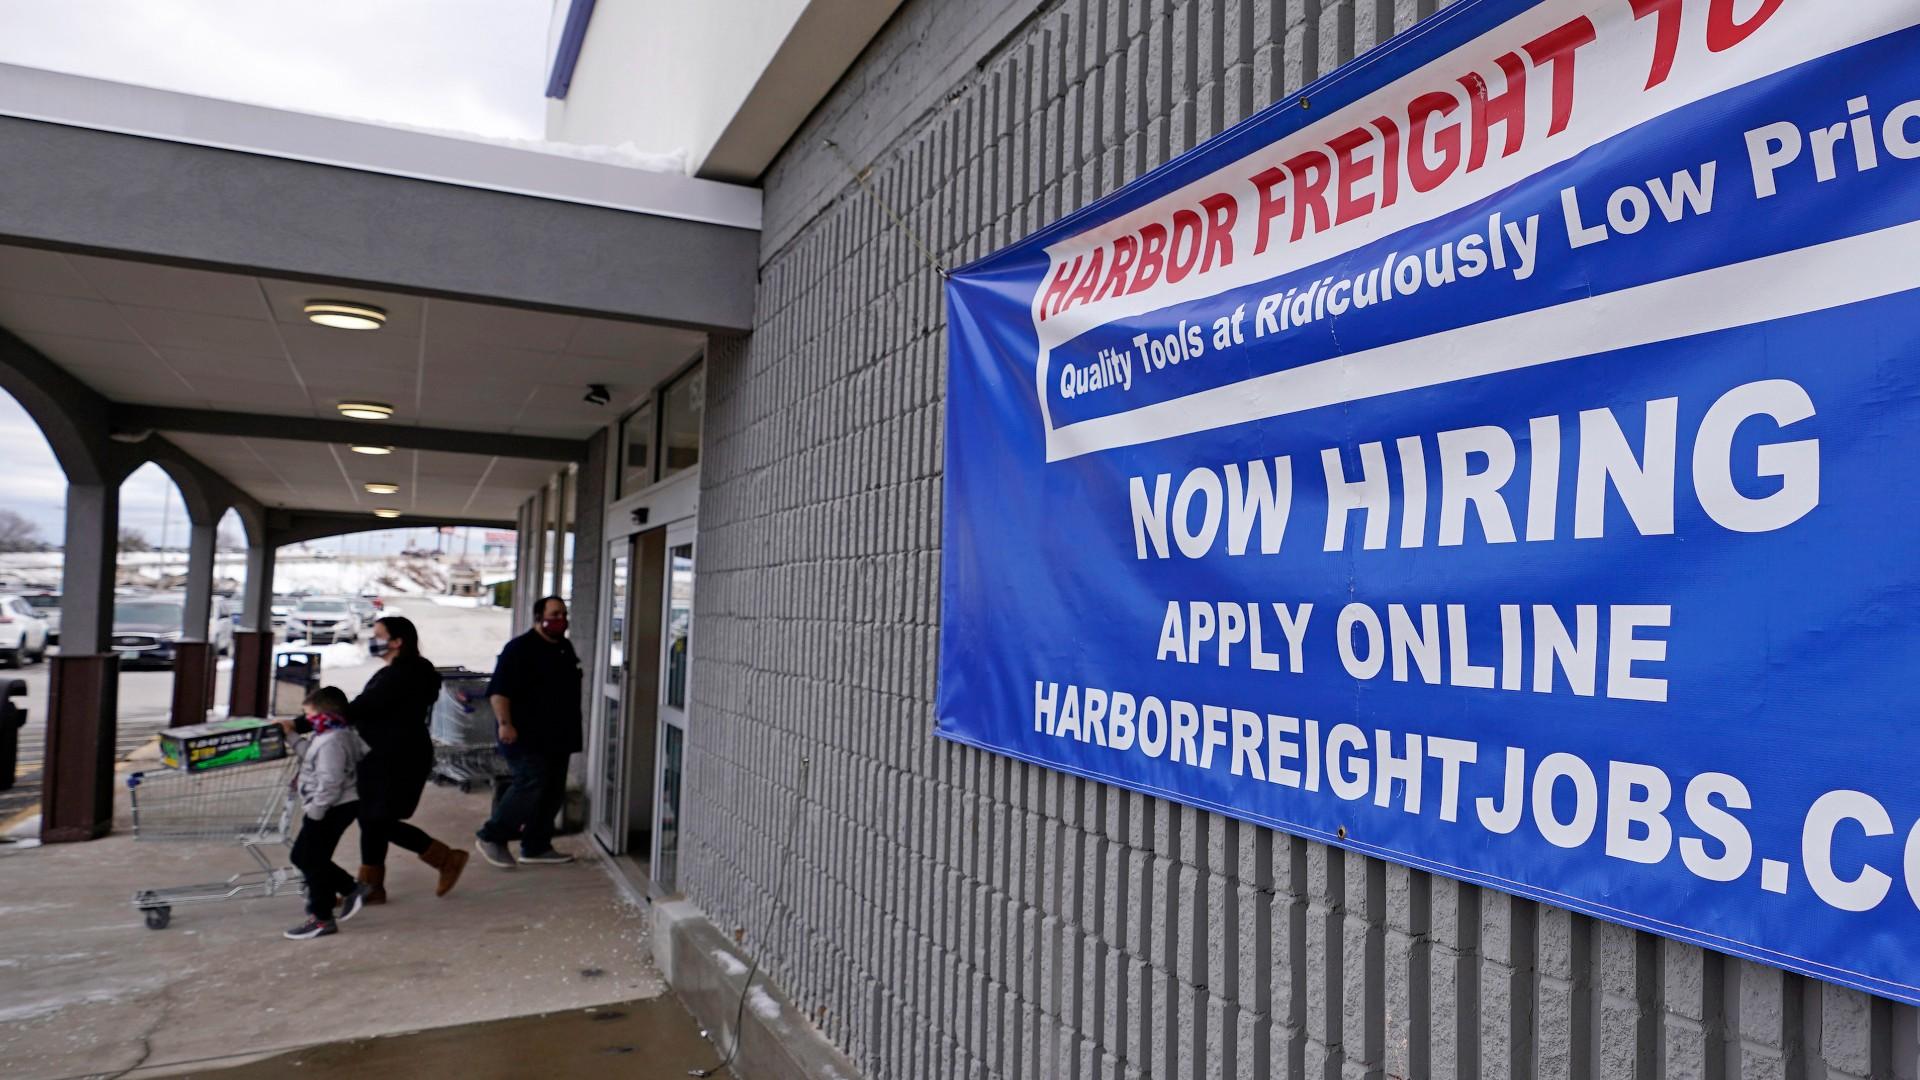 In this Dec. 10, 2020, file photo, a “Now Hiring” sign hangs on the front wall of a Harbor Freight Tools store in Manchester, N.H. (AP Photo / Charles Krupa, File)